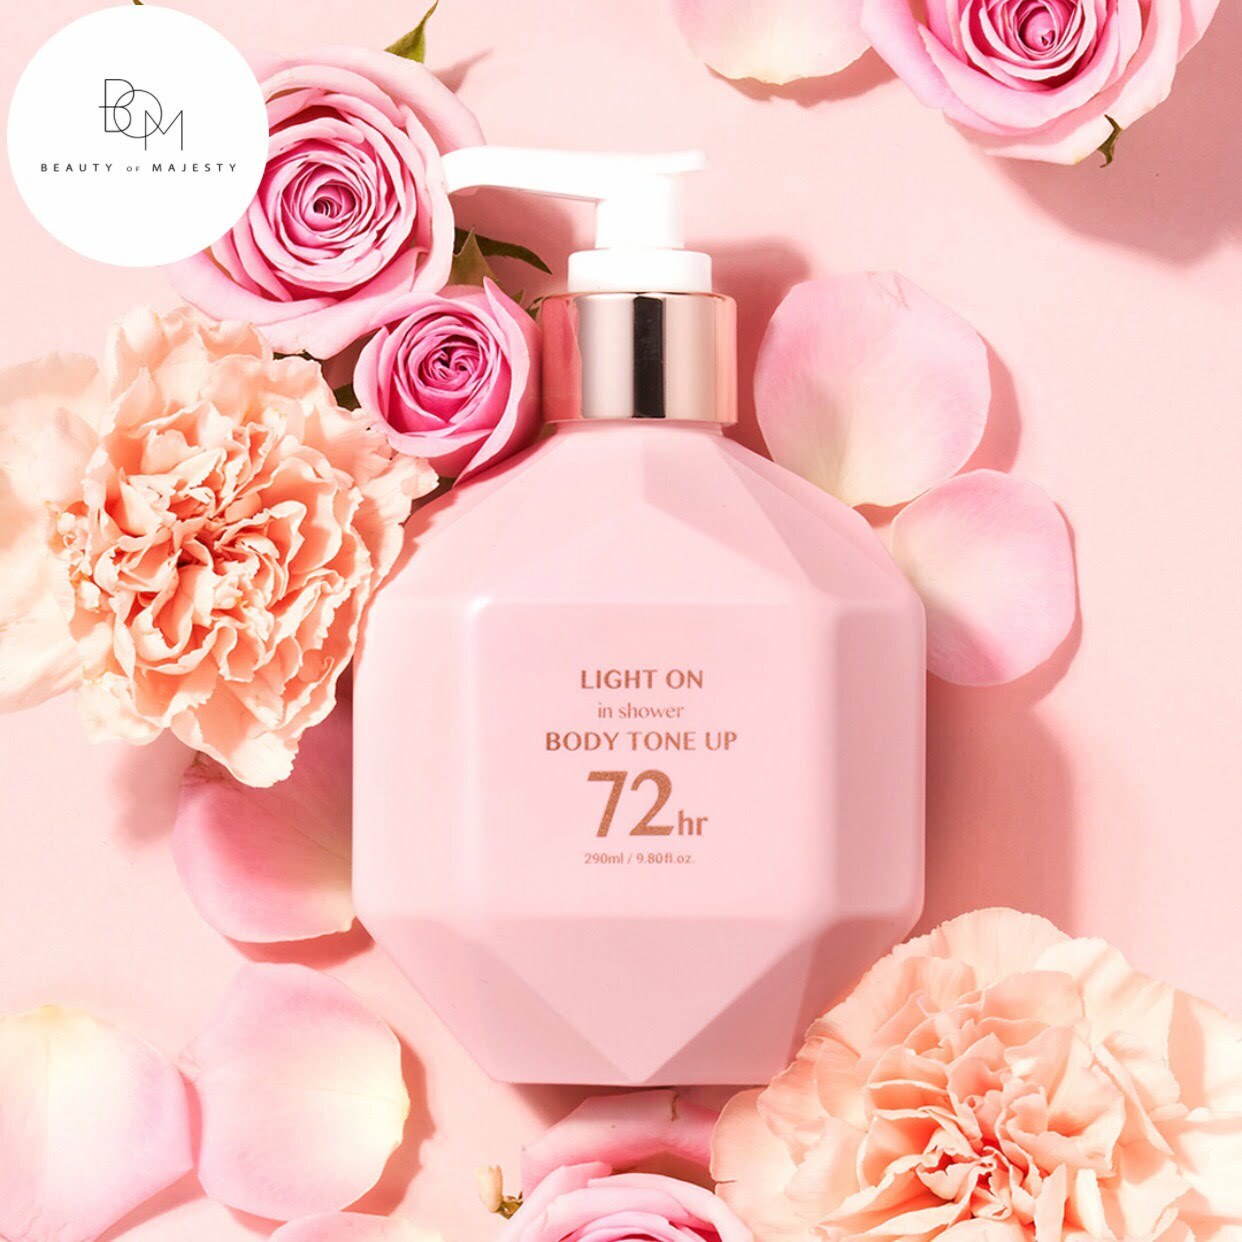 Sữa dưỡng thể Bom Tone Lifting Body Lotion Light On In Shower Body Tone Up